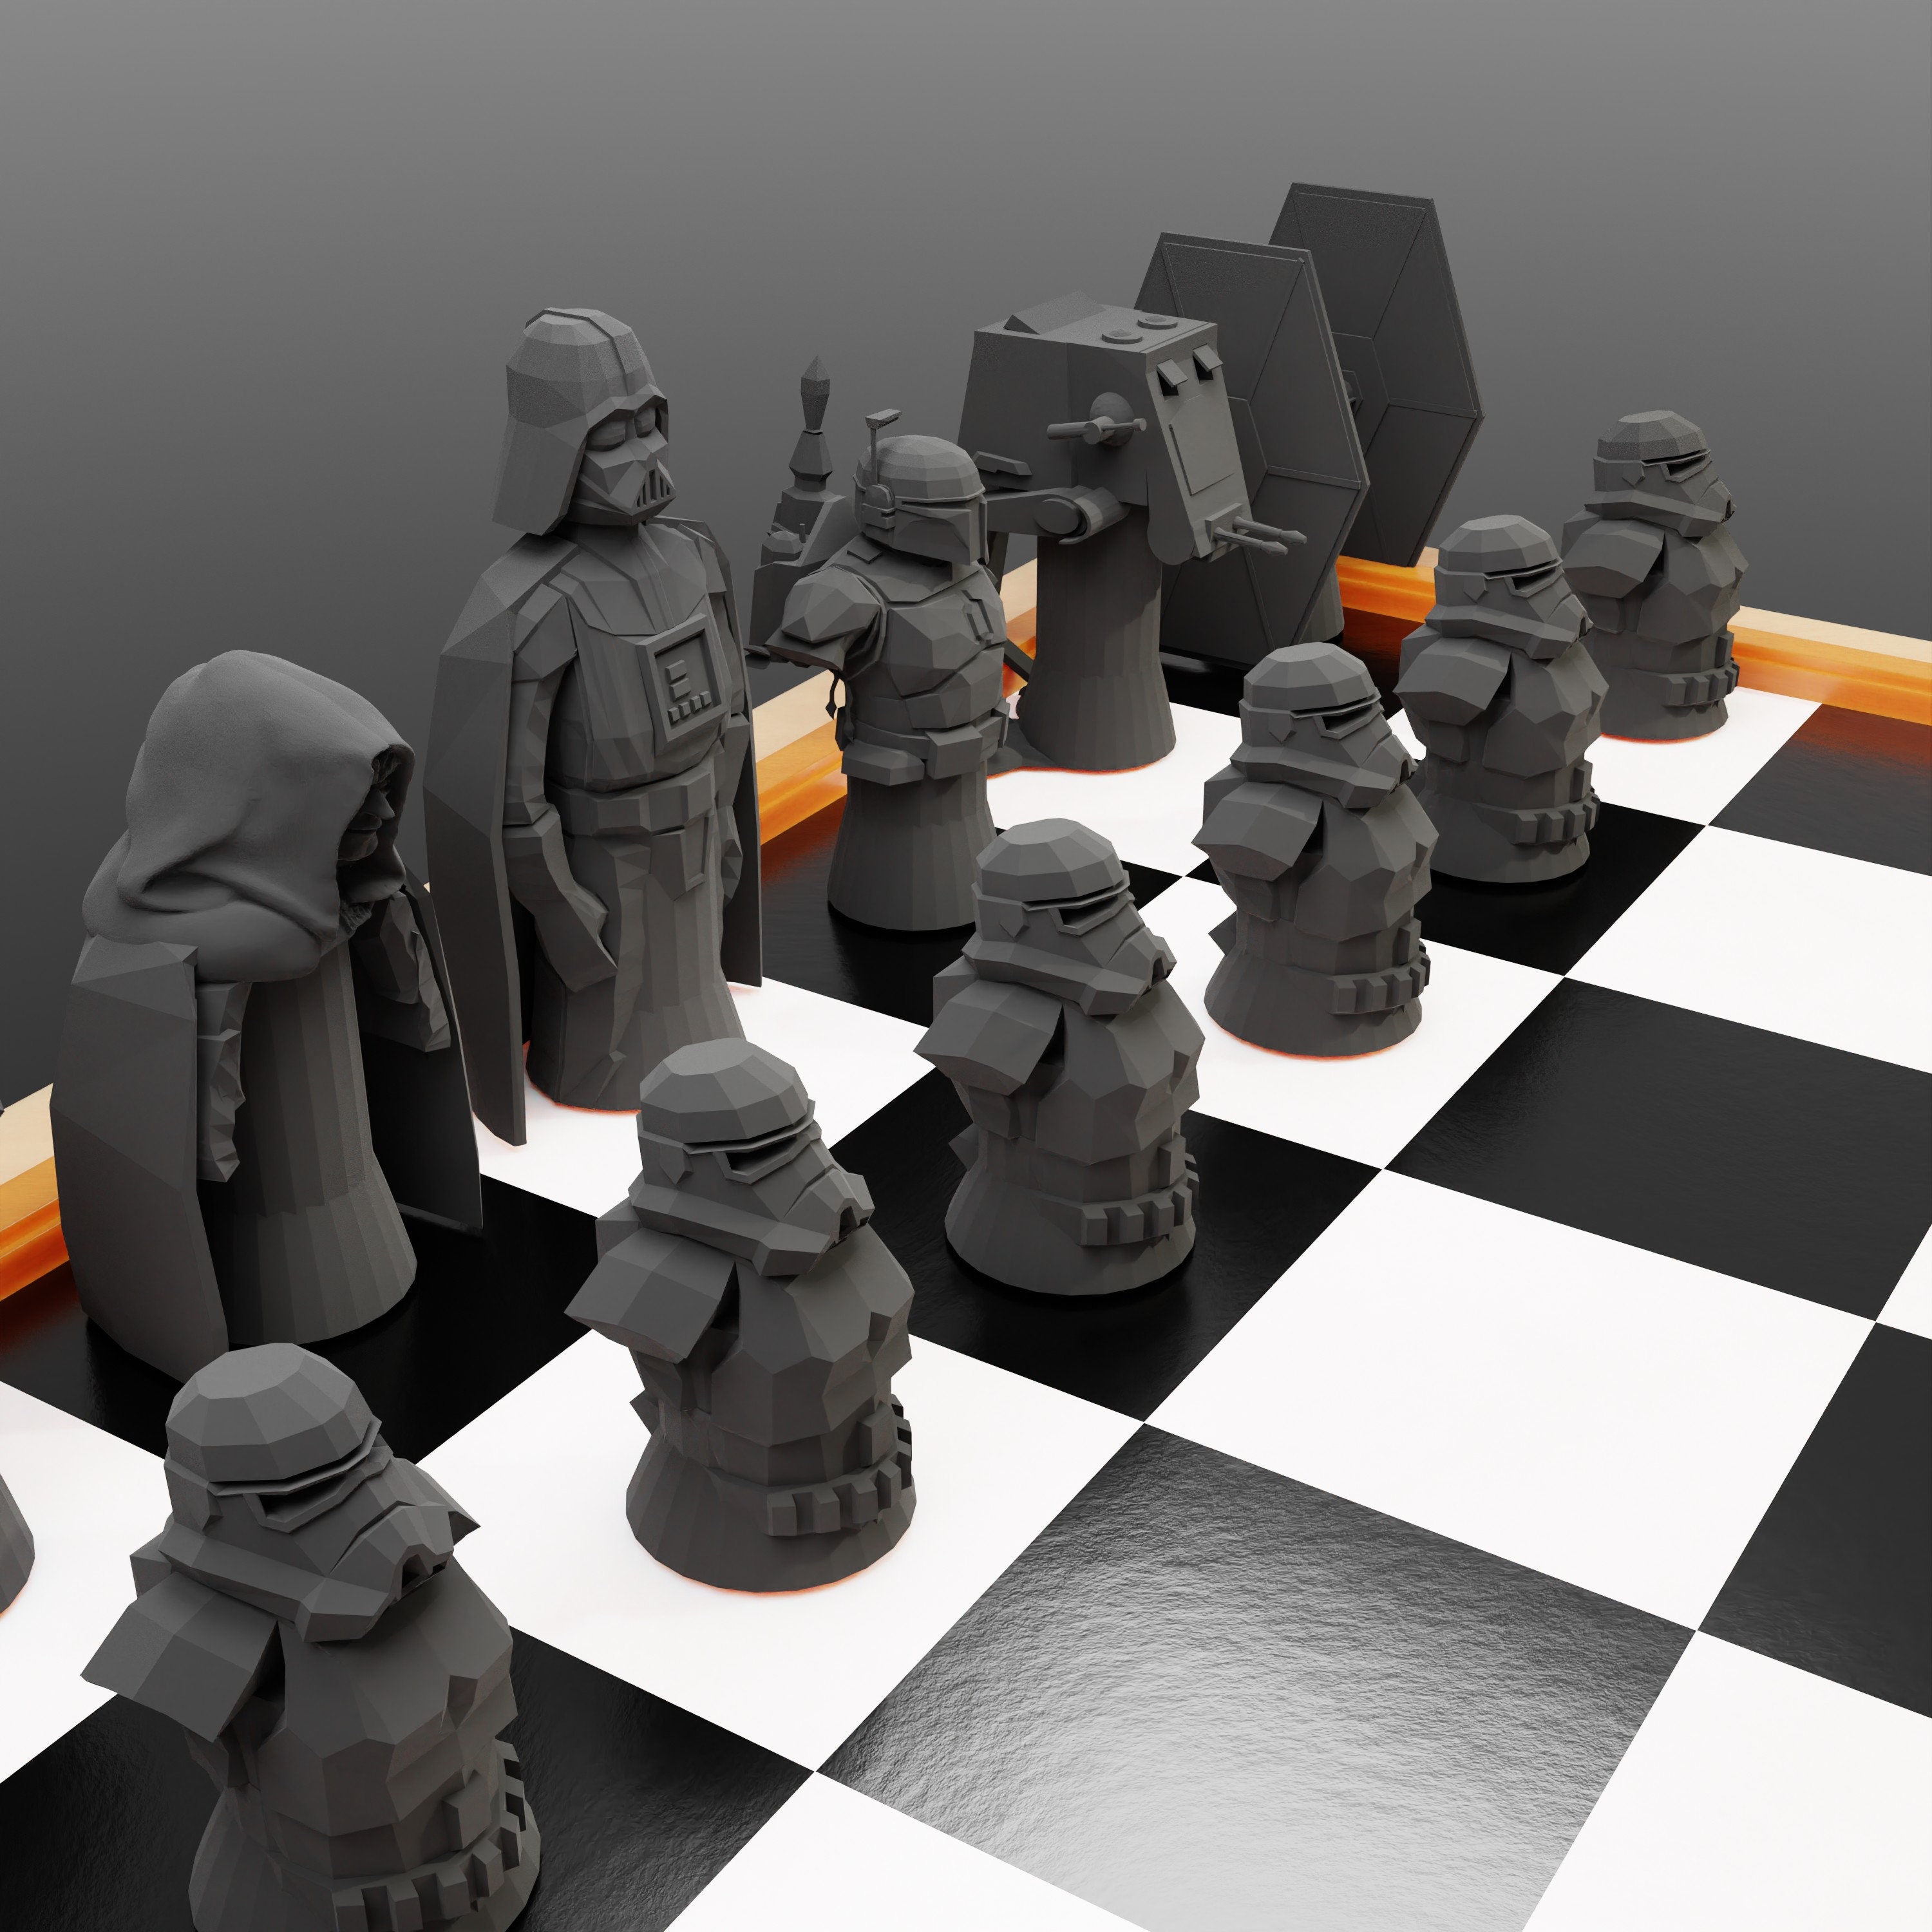 3D Printed Chess Set - Buy Online - Etsy